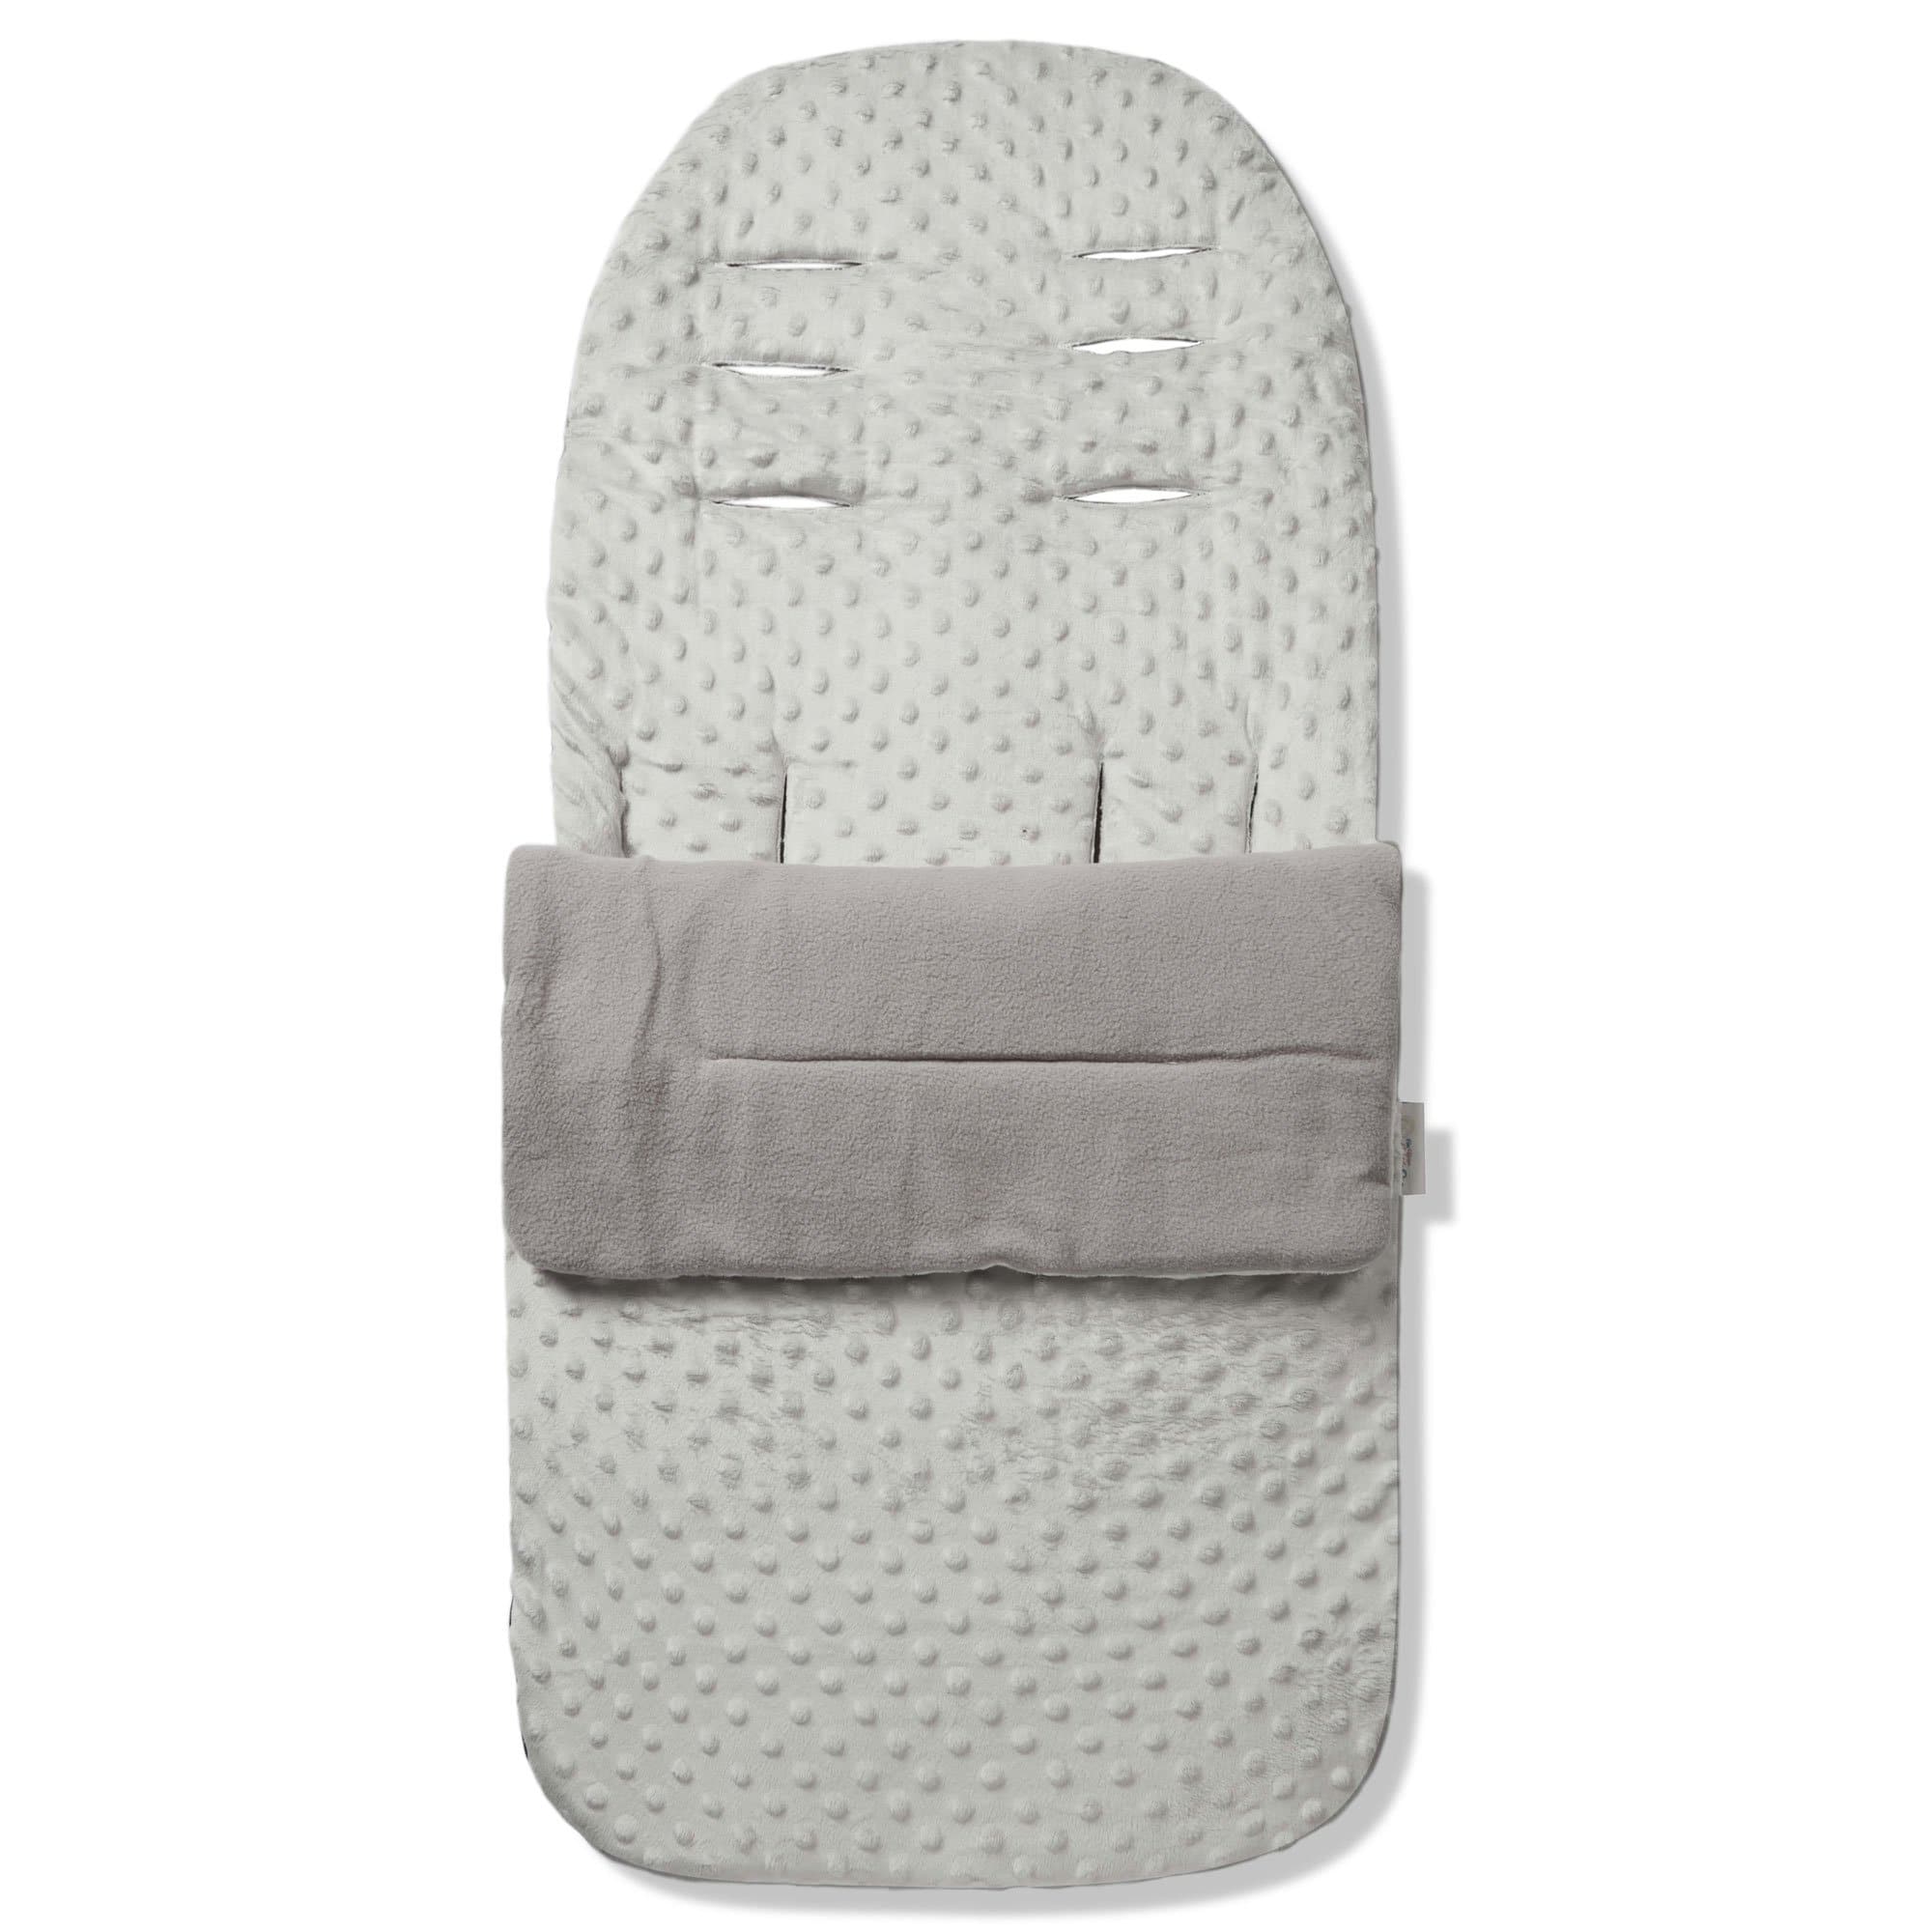 Dimple Footmuff / Cosy Toes Compatible with Mamas & Papas - Grey / Fits All Models | For Your Little One